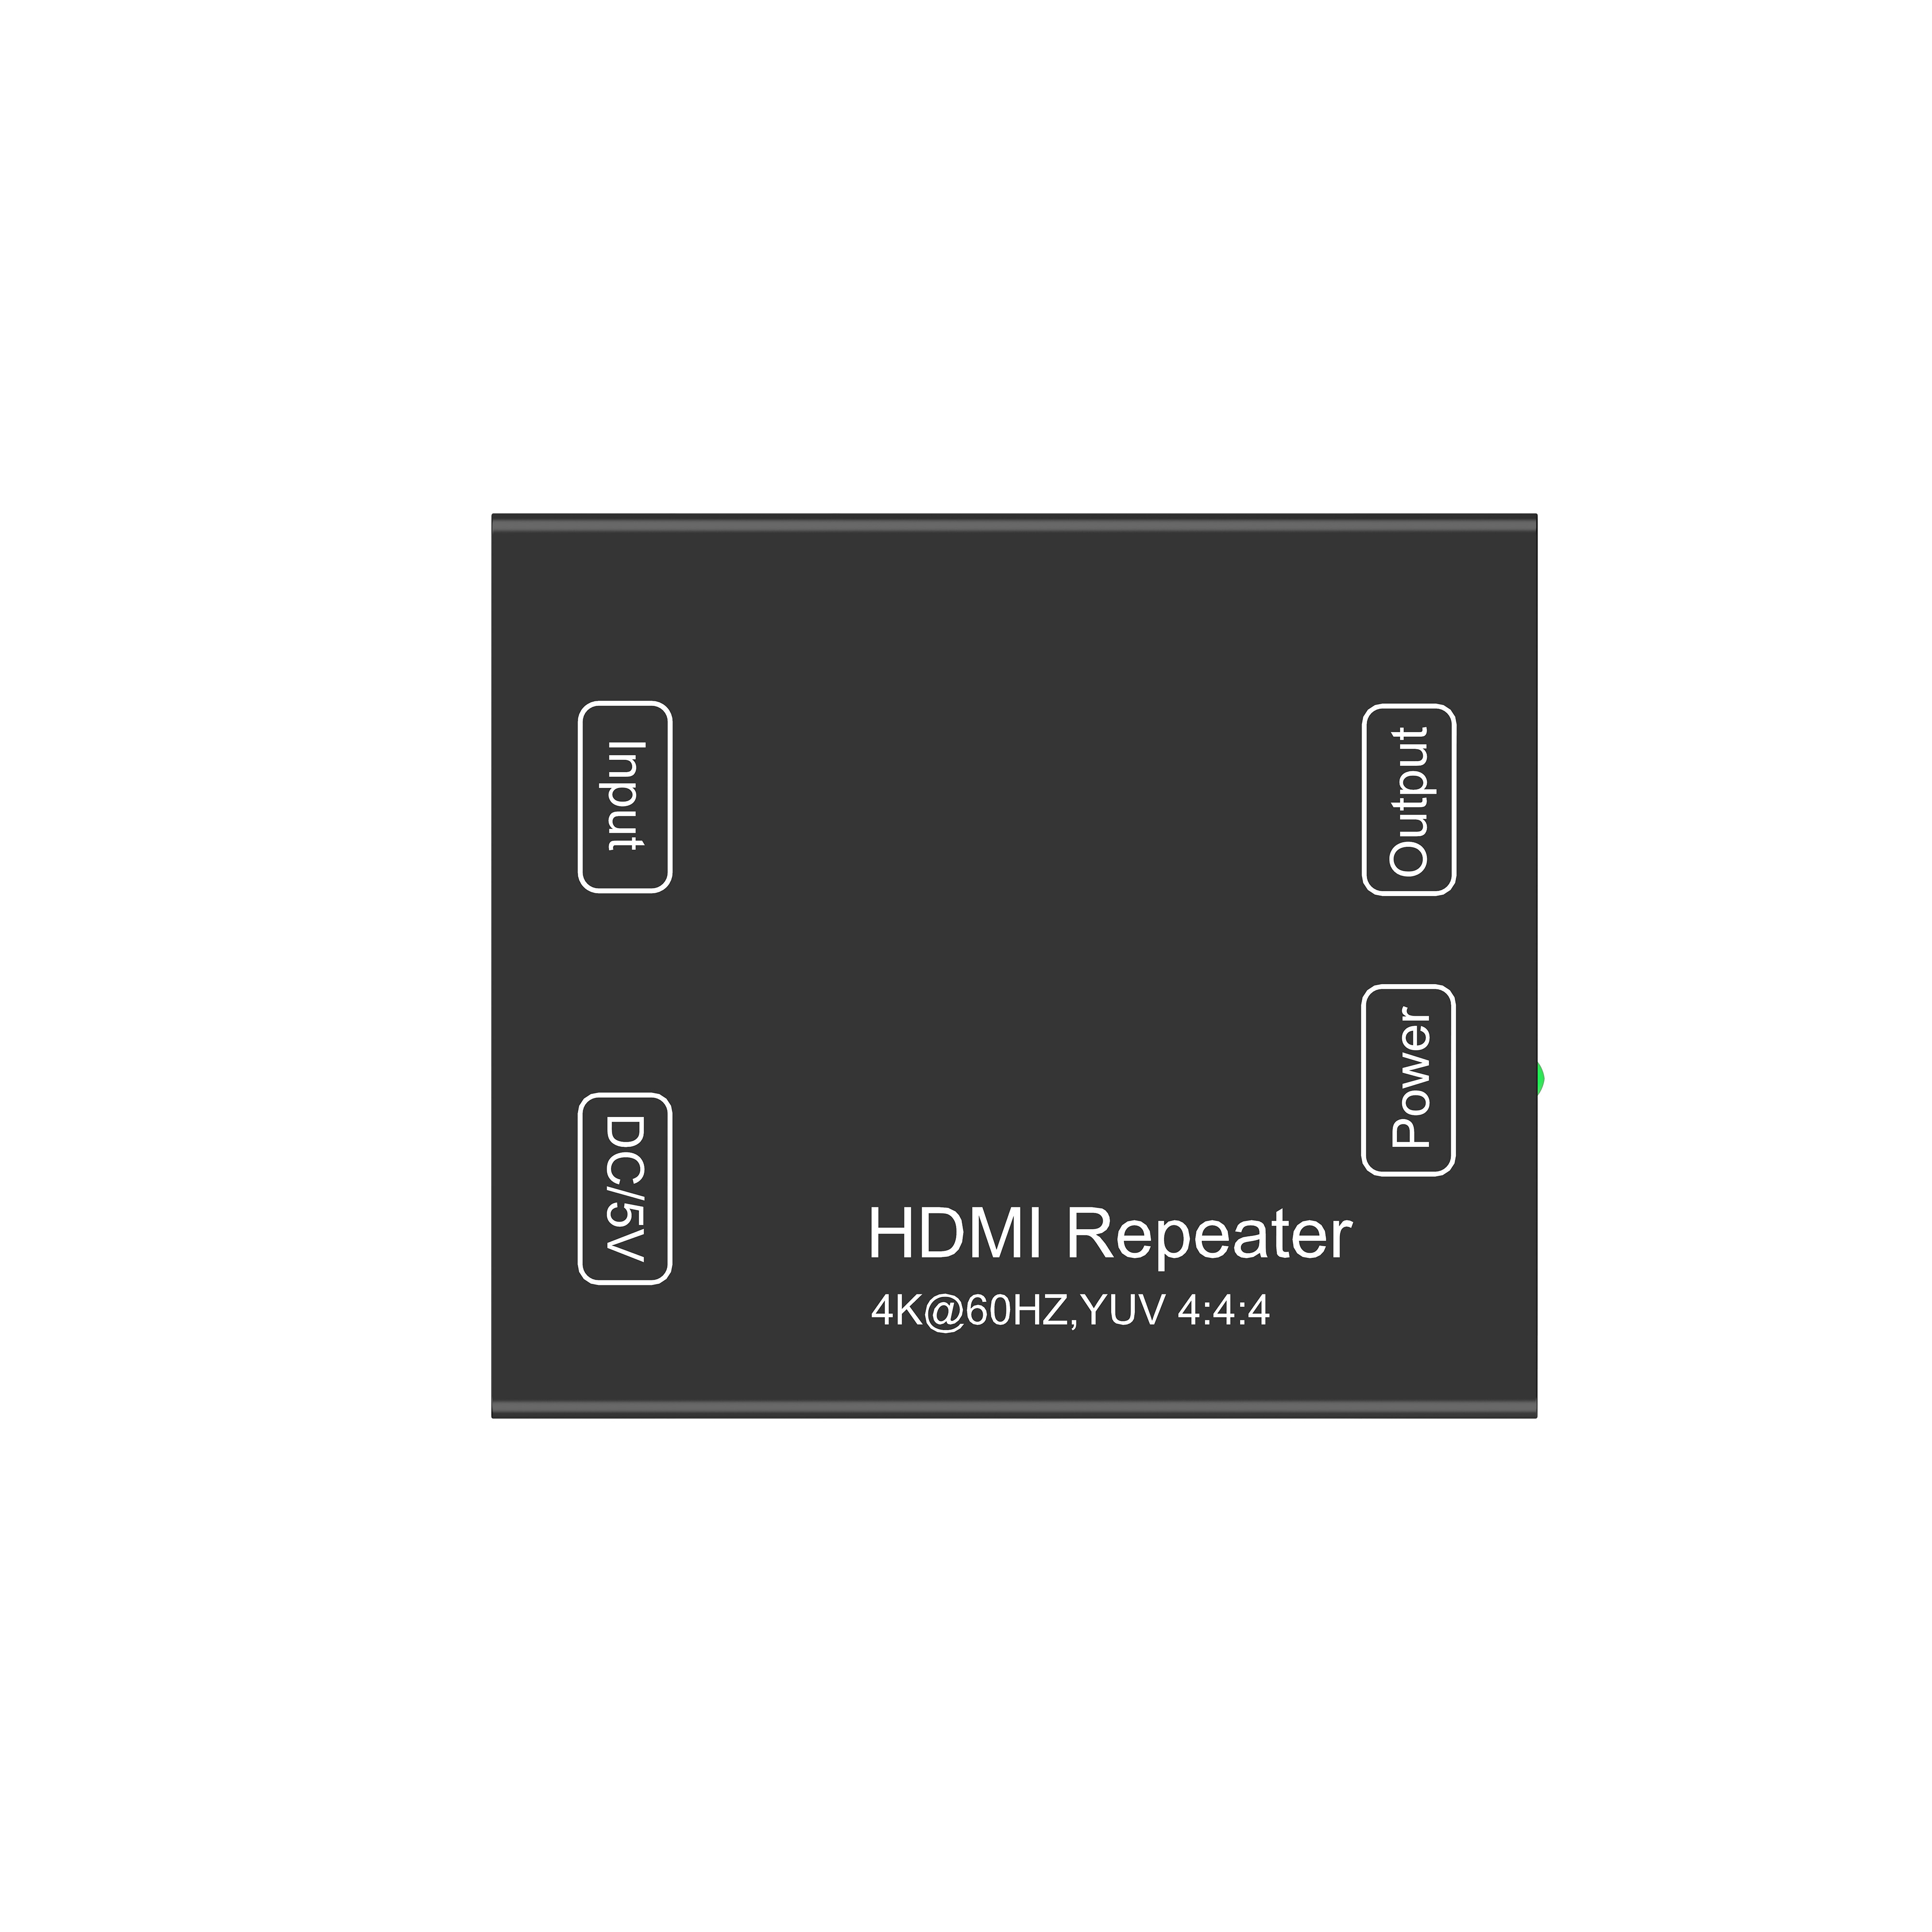  HDMI Repeater - Support 4K@60HZ 4:4:4